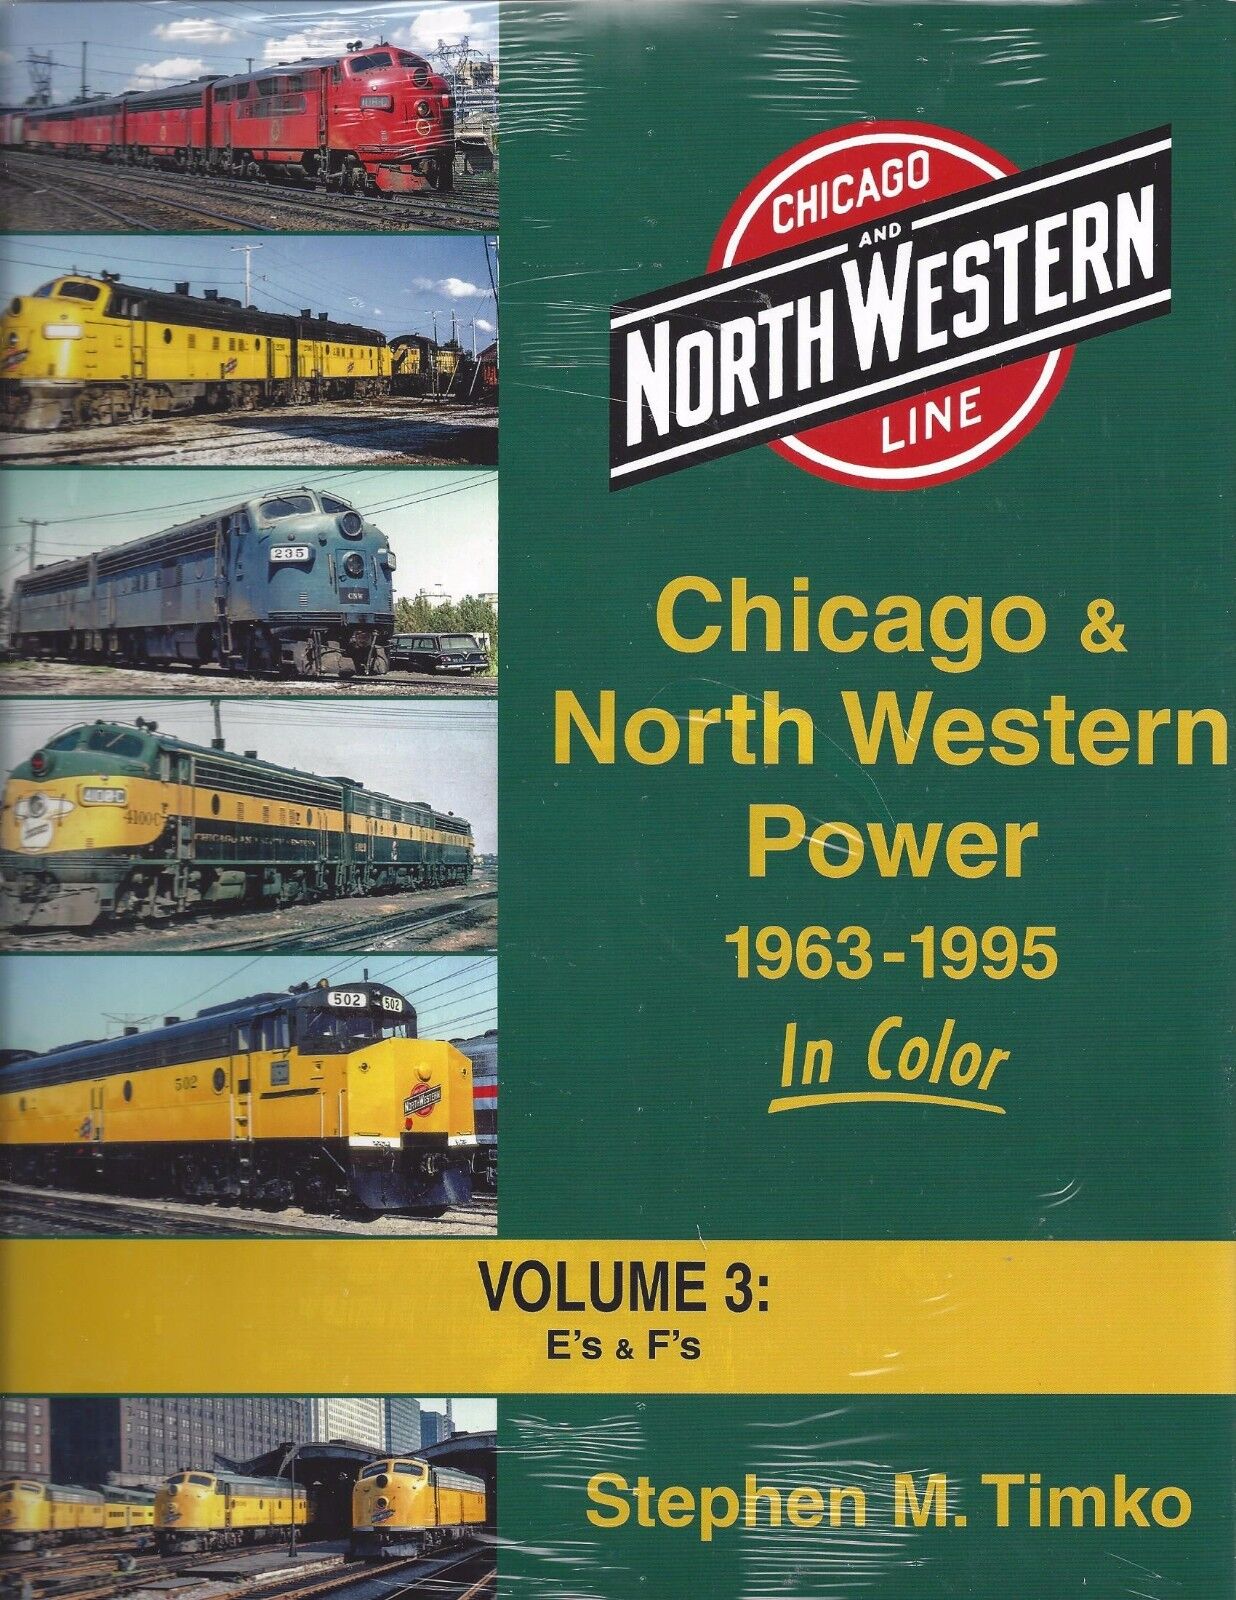 CHICAGO & NORTH WESTERN Power, Vol. 3: E\'s & F\'s after 1963 - (BRAND NEW BOOK)